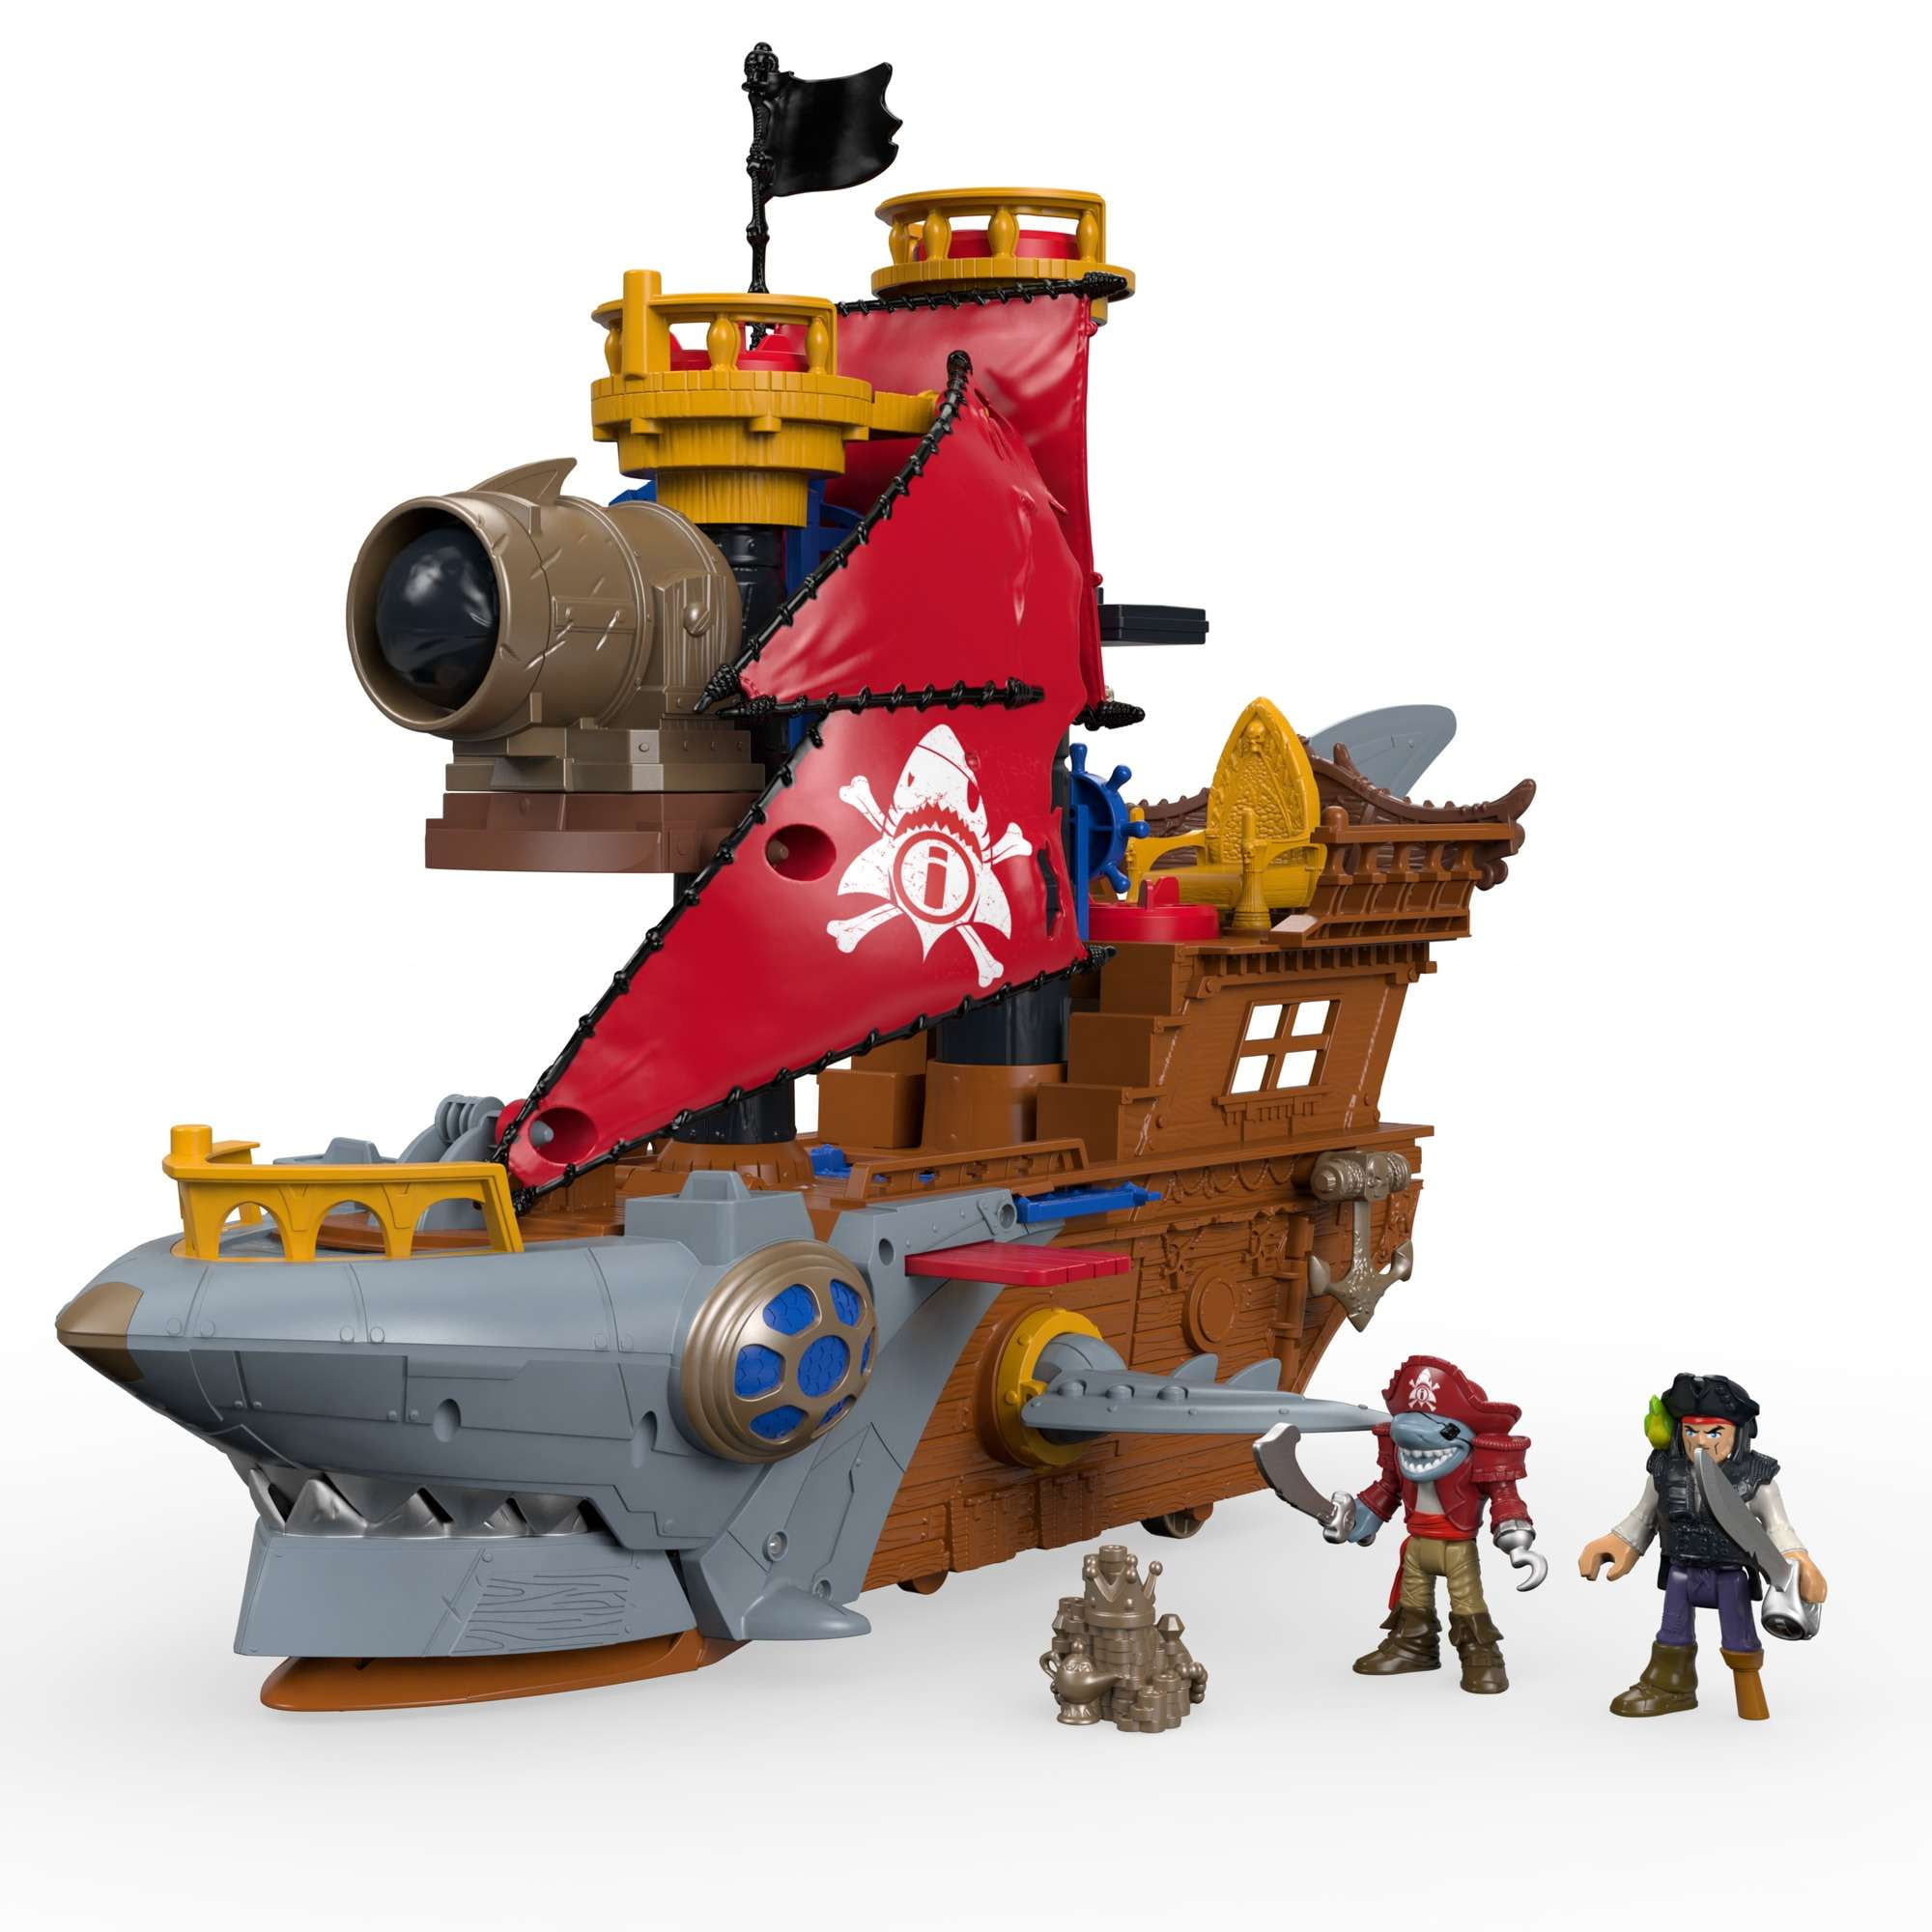 Treasure X Sunken Gold Ship 2020 Playset With 25 Levels of Adventure 41579 for sale online 